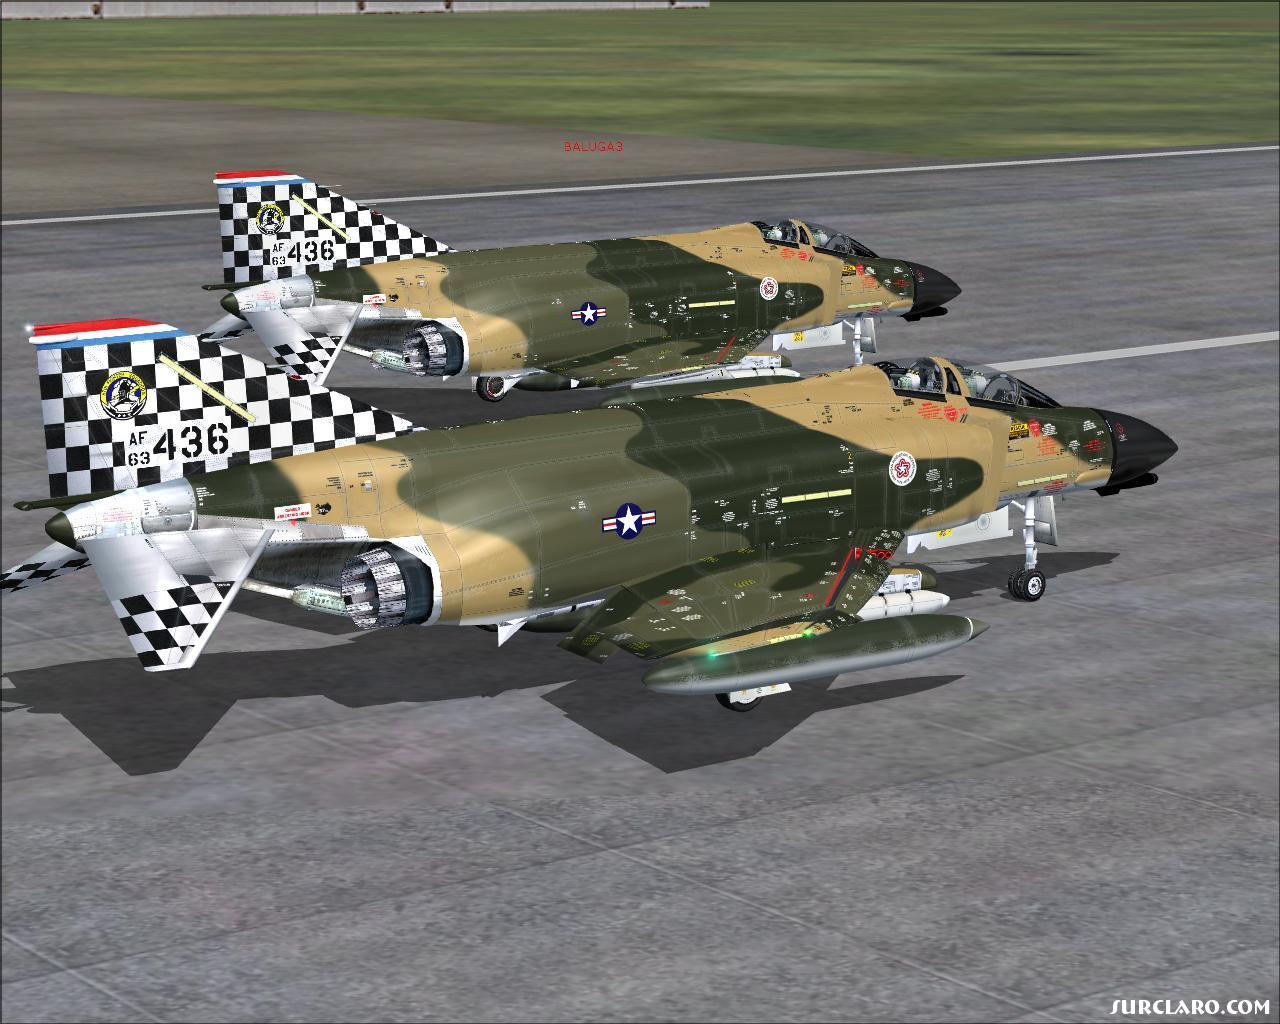 pair of F-4s ready for take off - Photo 15504